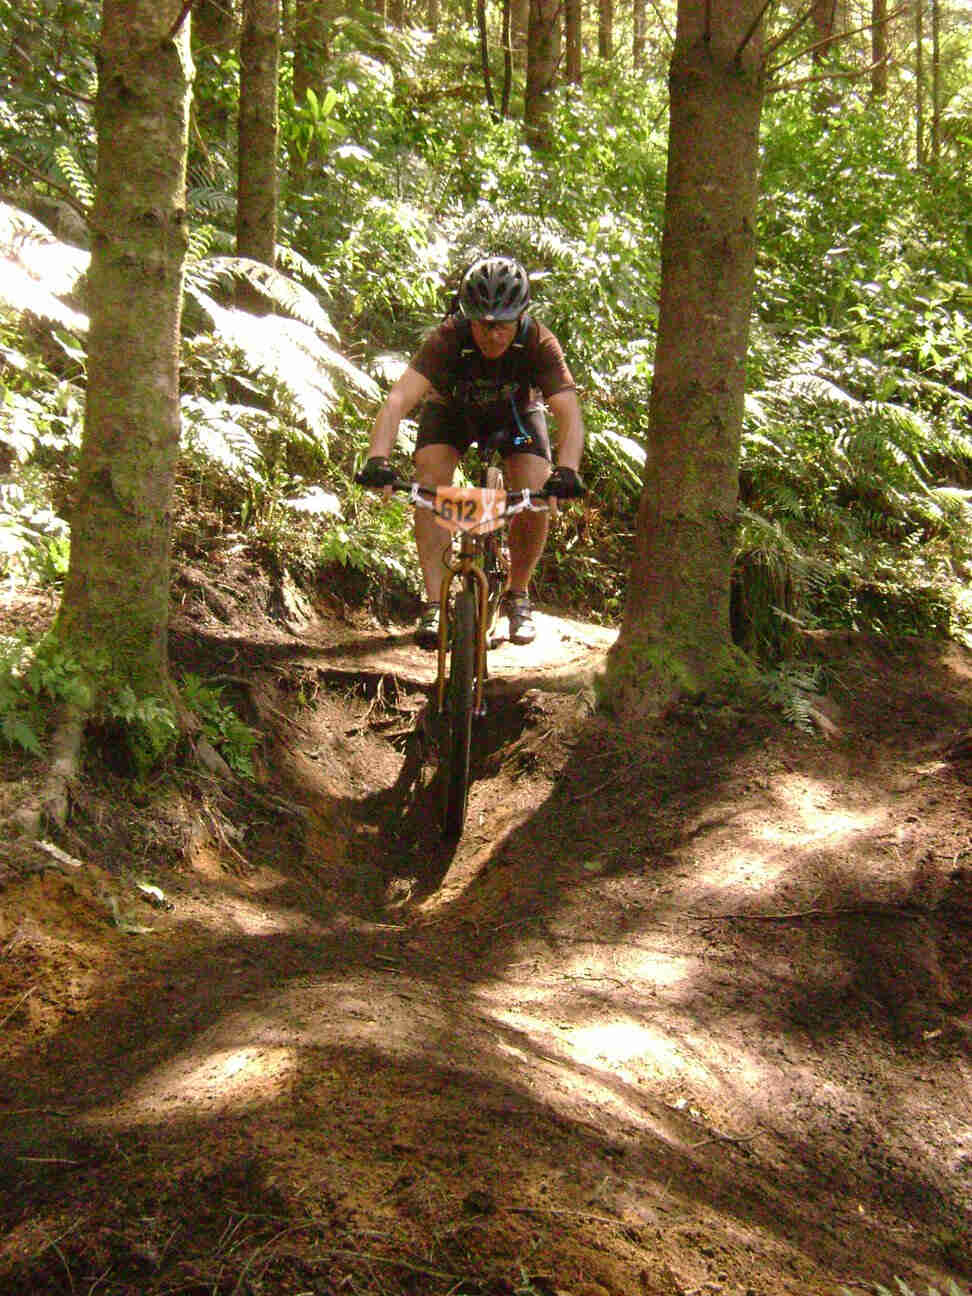 Front view of a cyclist, riding a Surly bike between 2 trees, on a dirt trail in a sunny forest